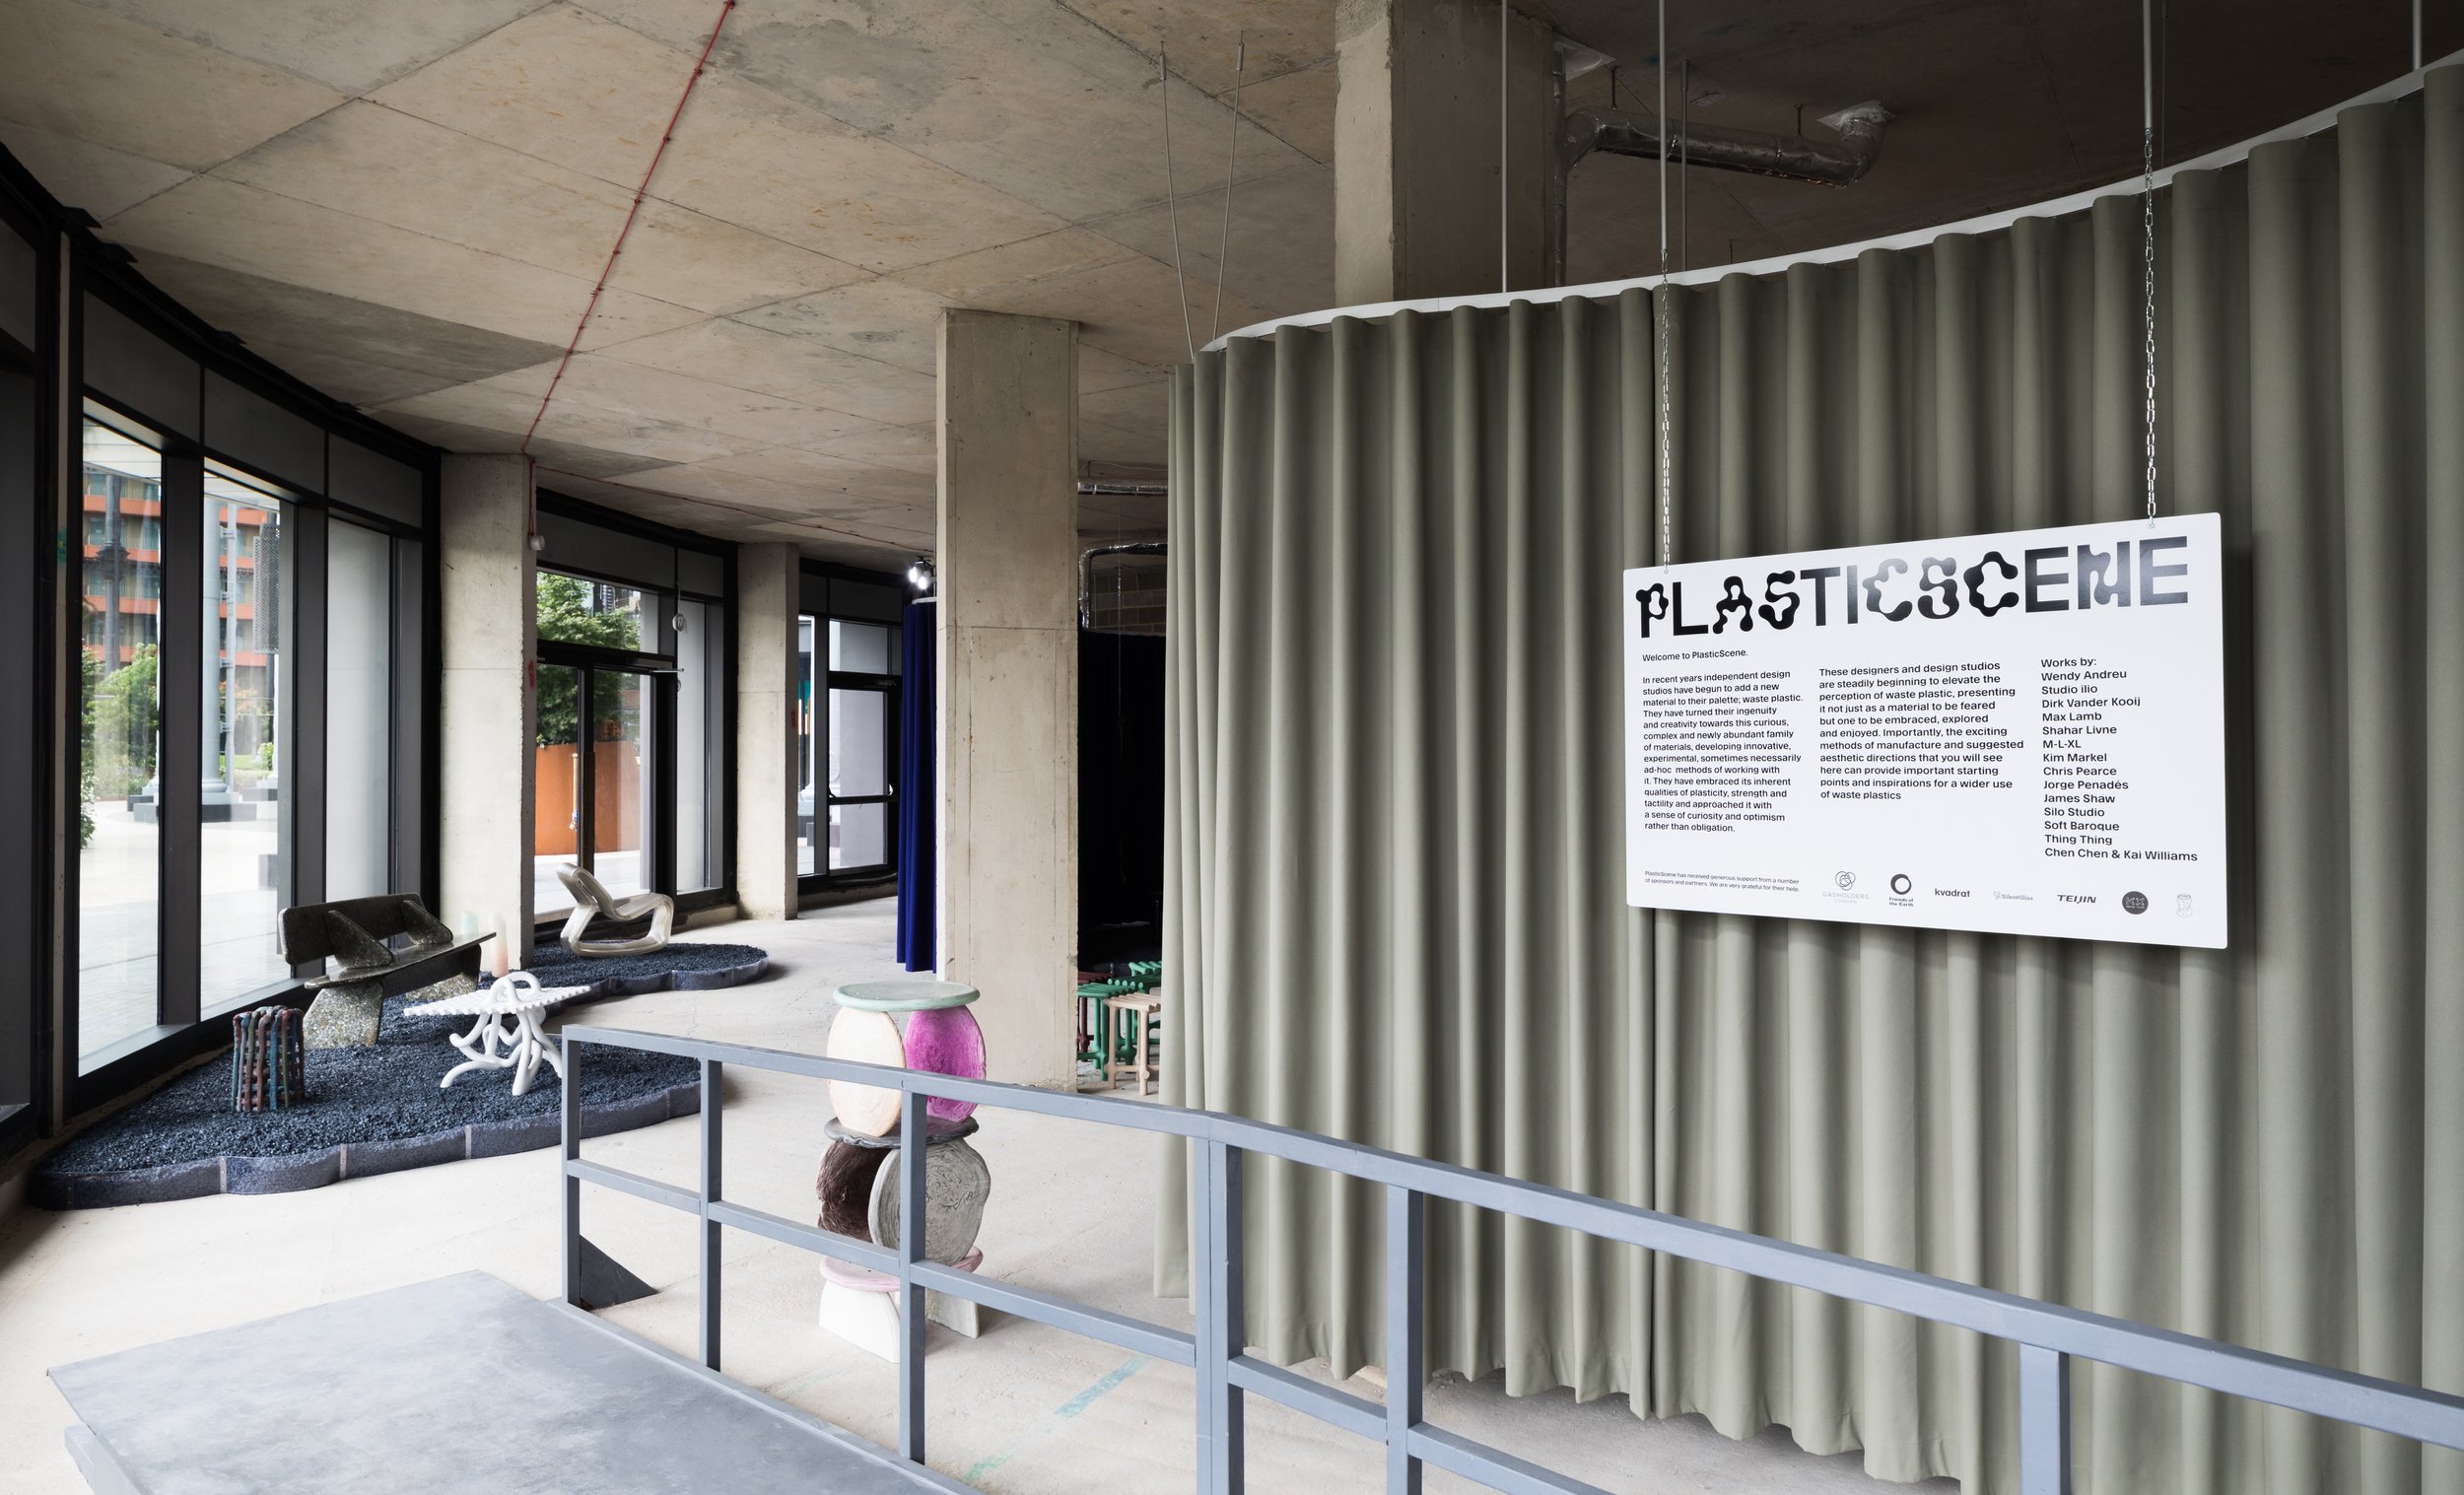 Plasticscene by Modern Design Review and James Shaw